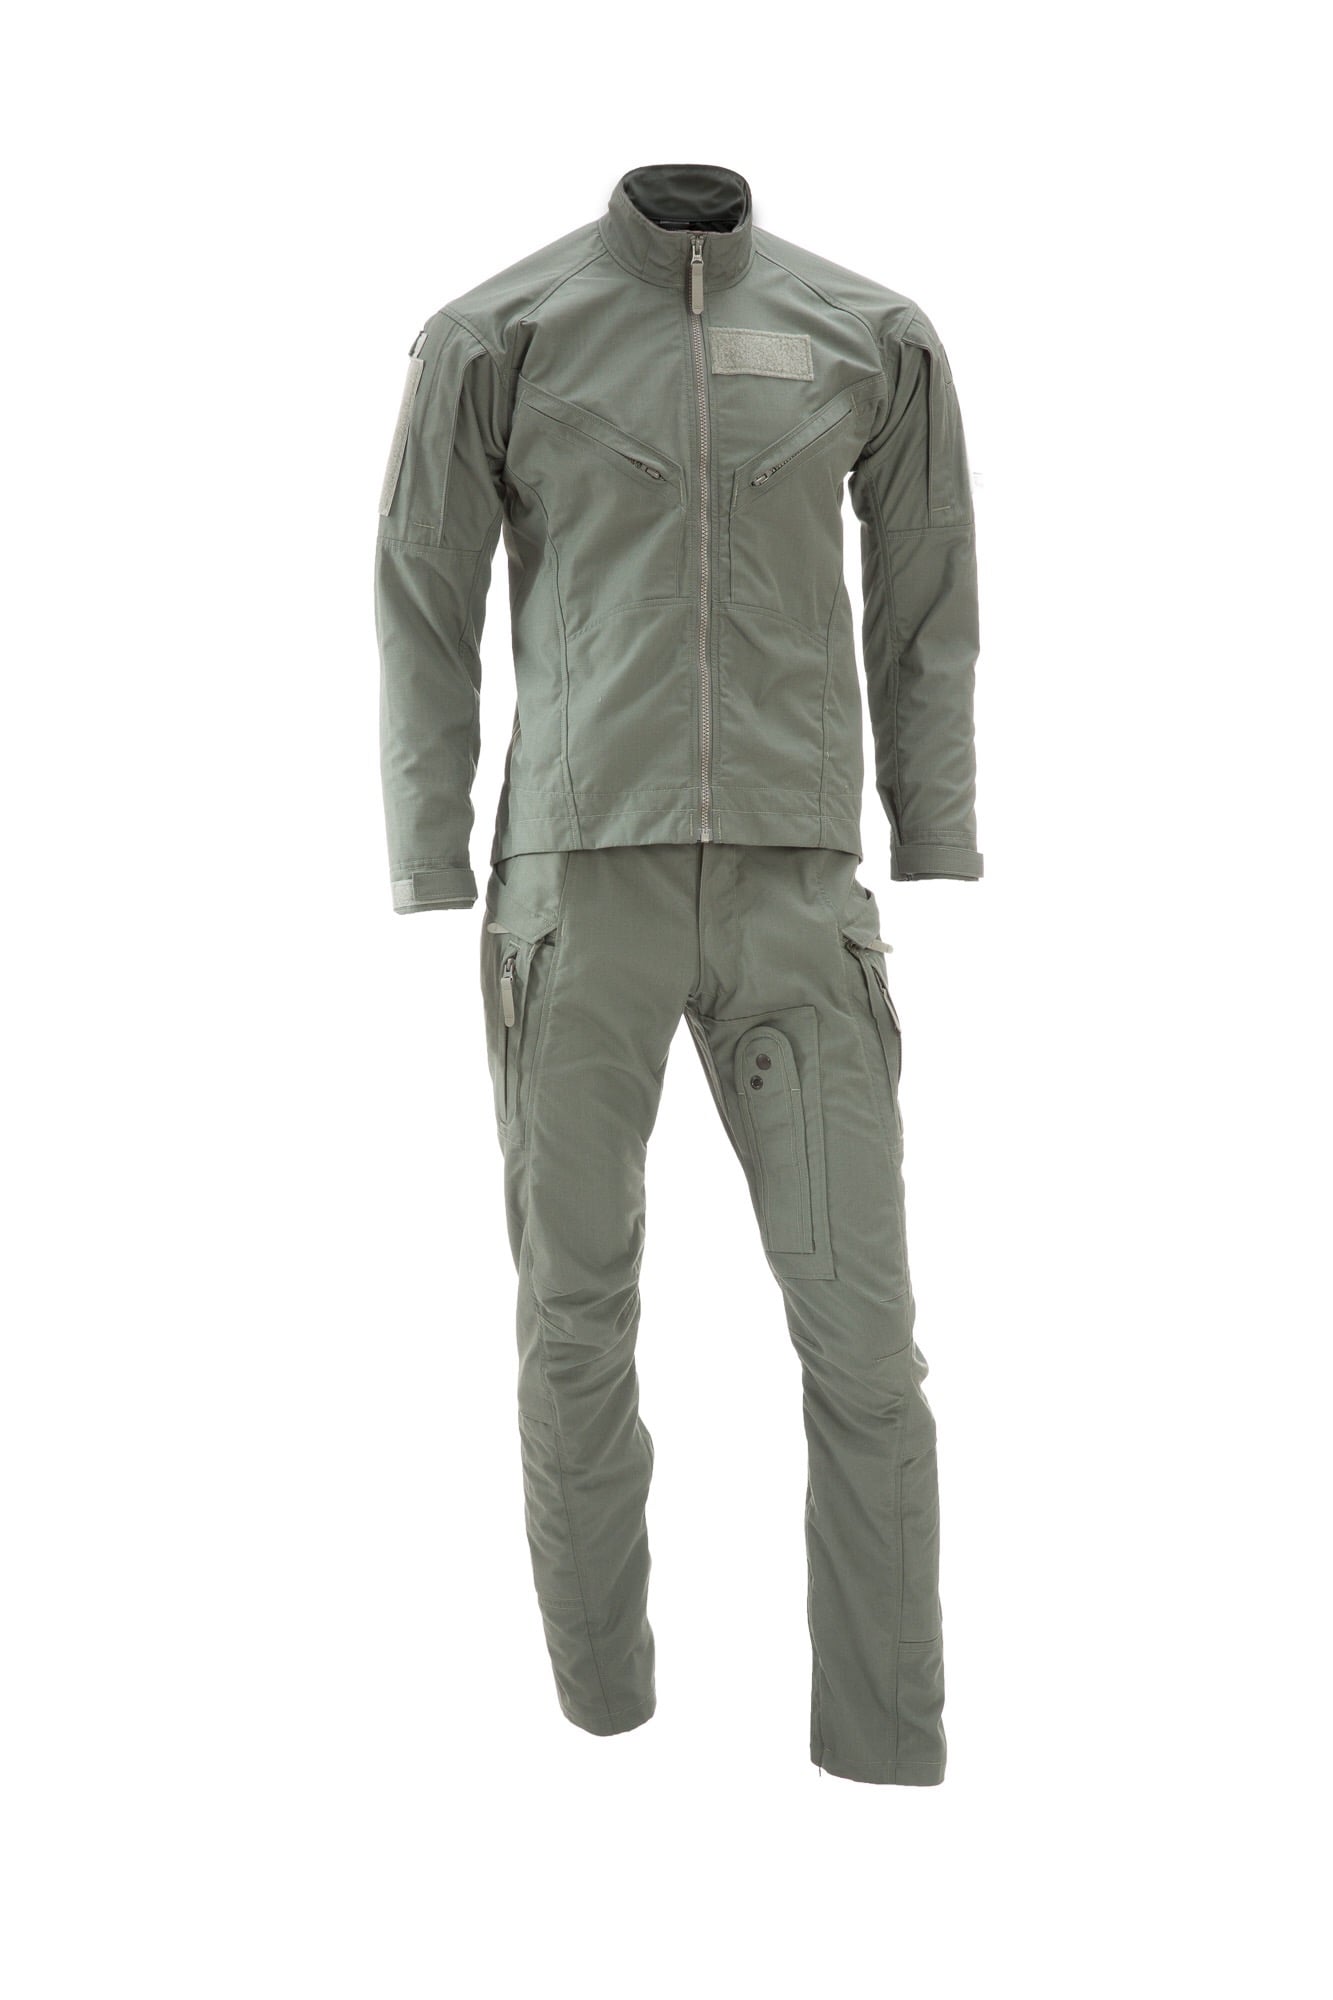 This image portrays 2 Piece Flight Suit - Coat and Trouser Set by Government Suppliers & Associates.